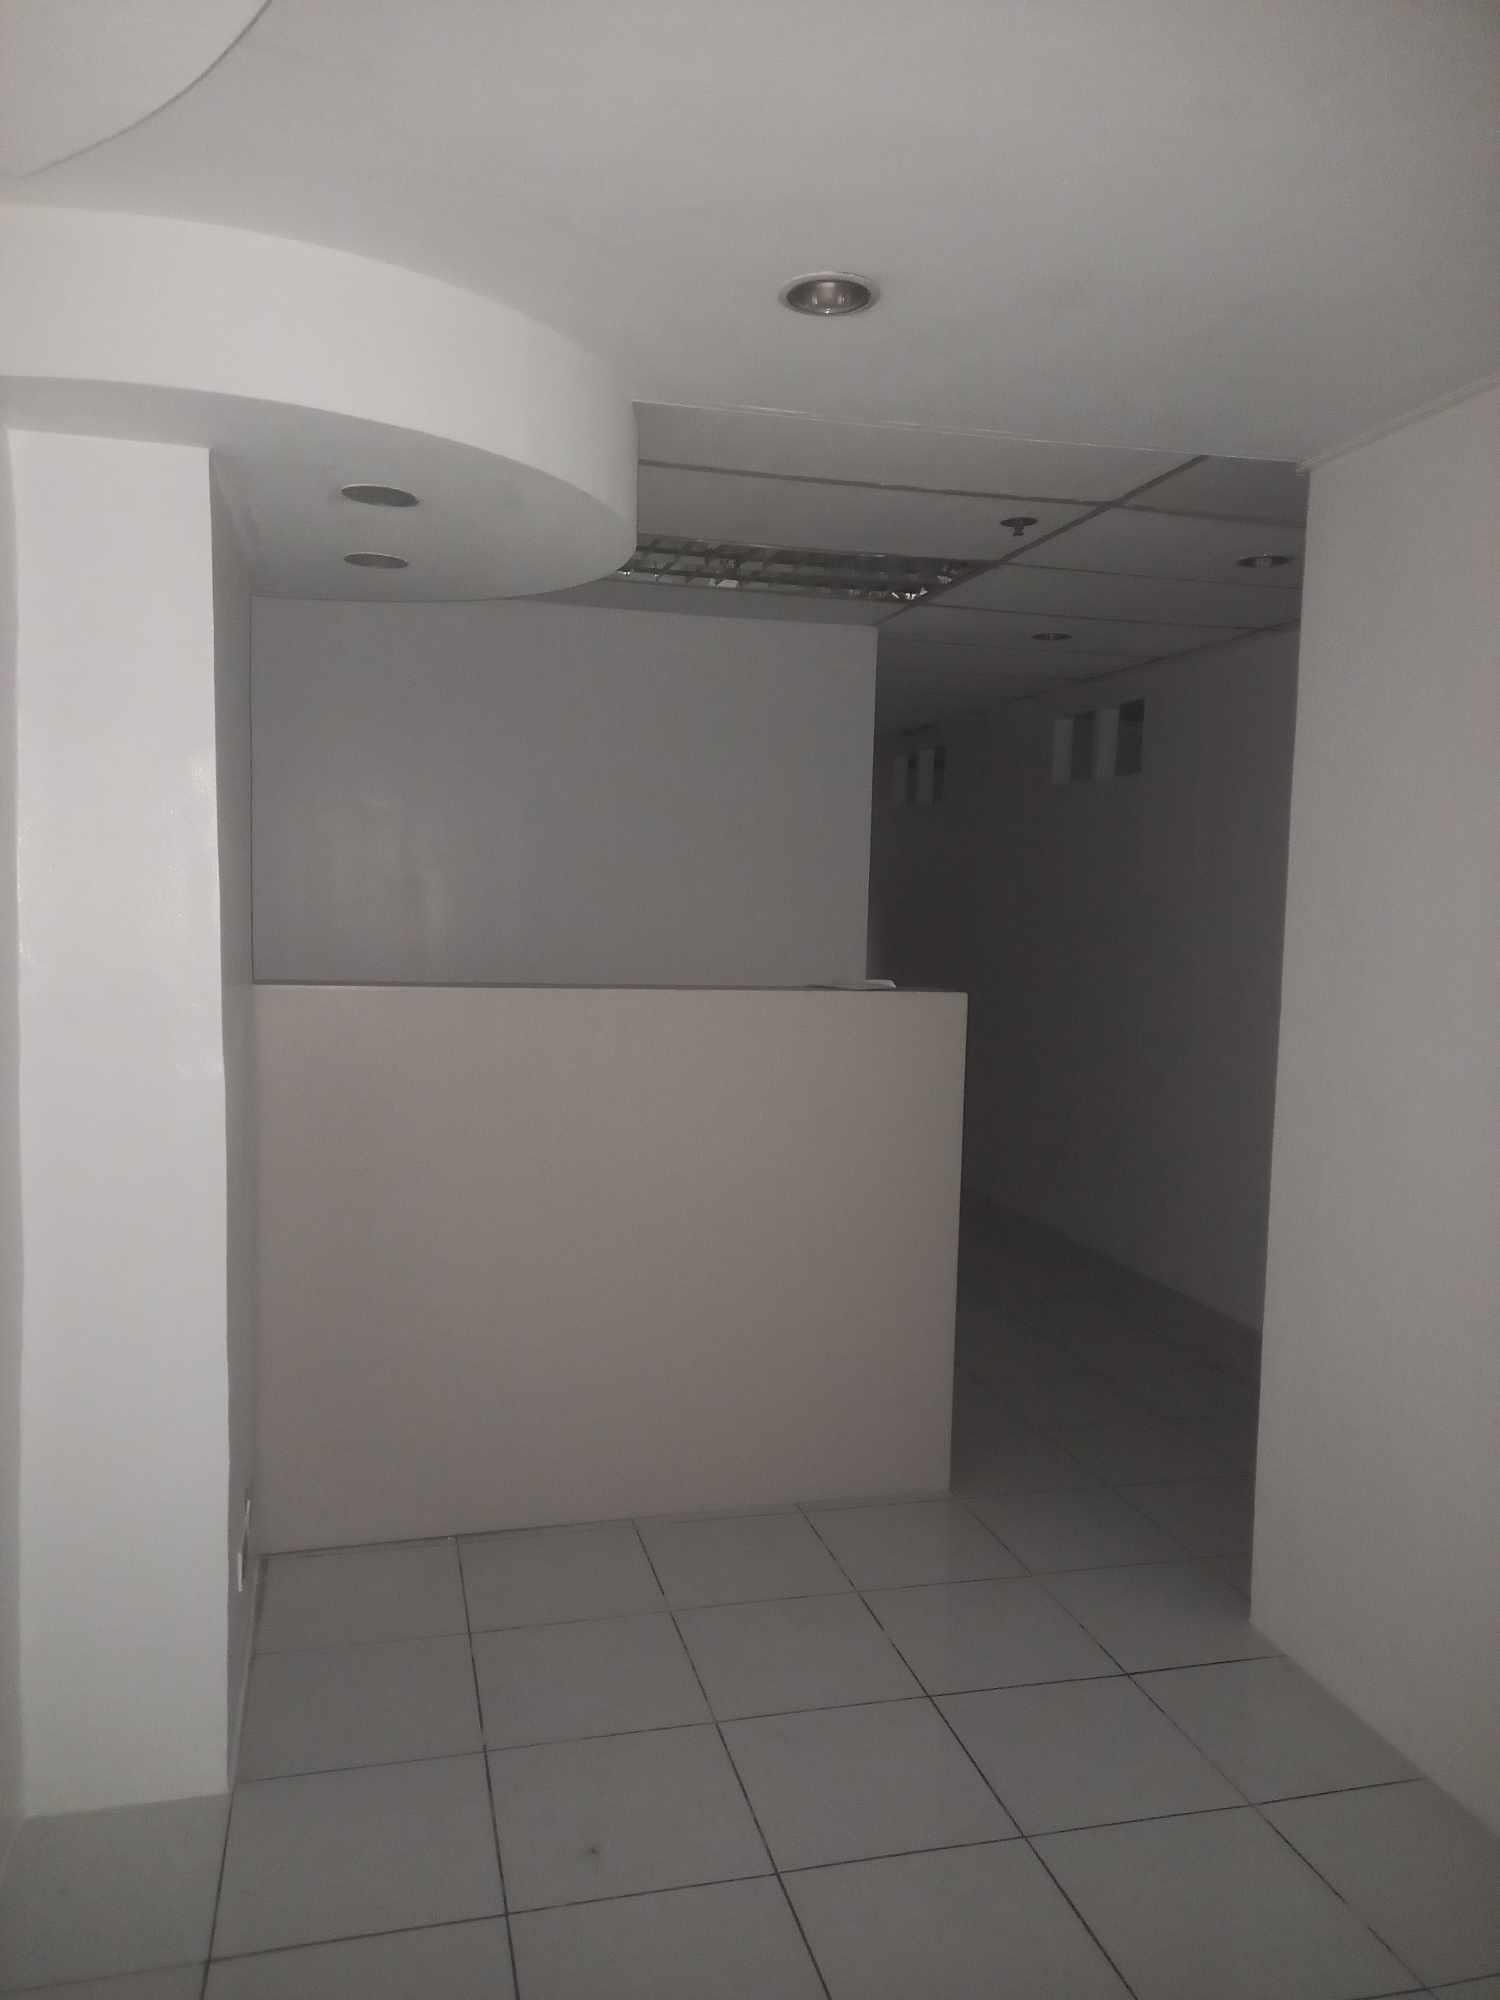 For Rent Lease Fitted 94 sqm Office Space Ortigas Center